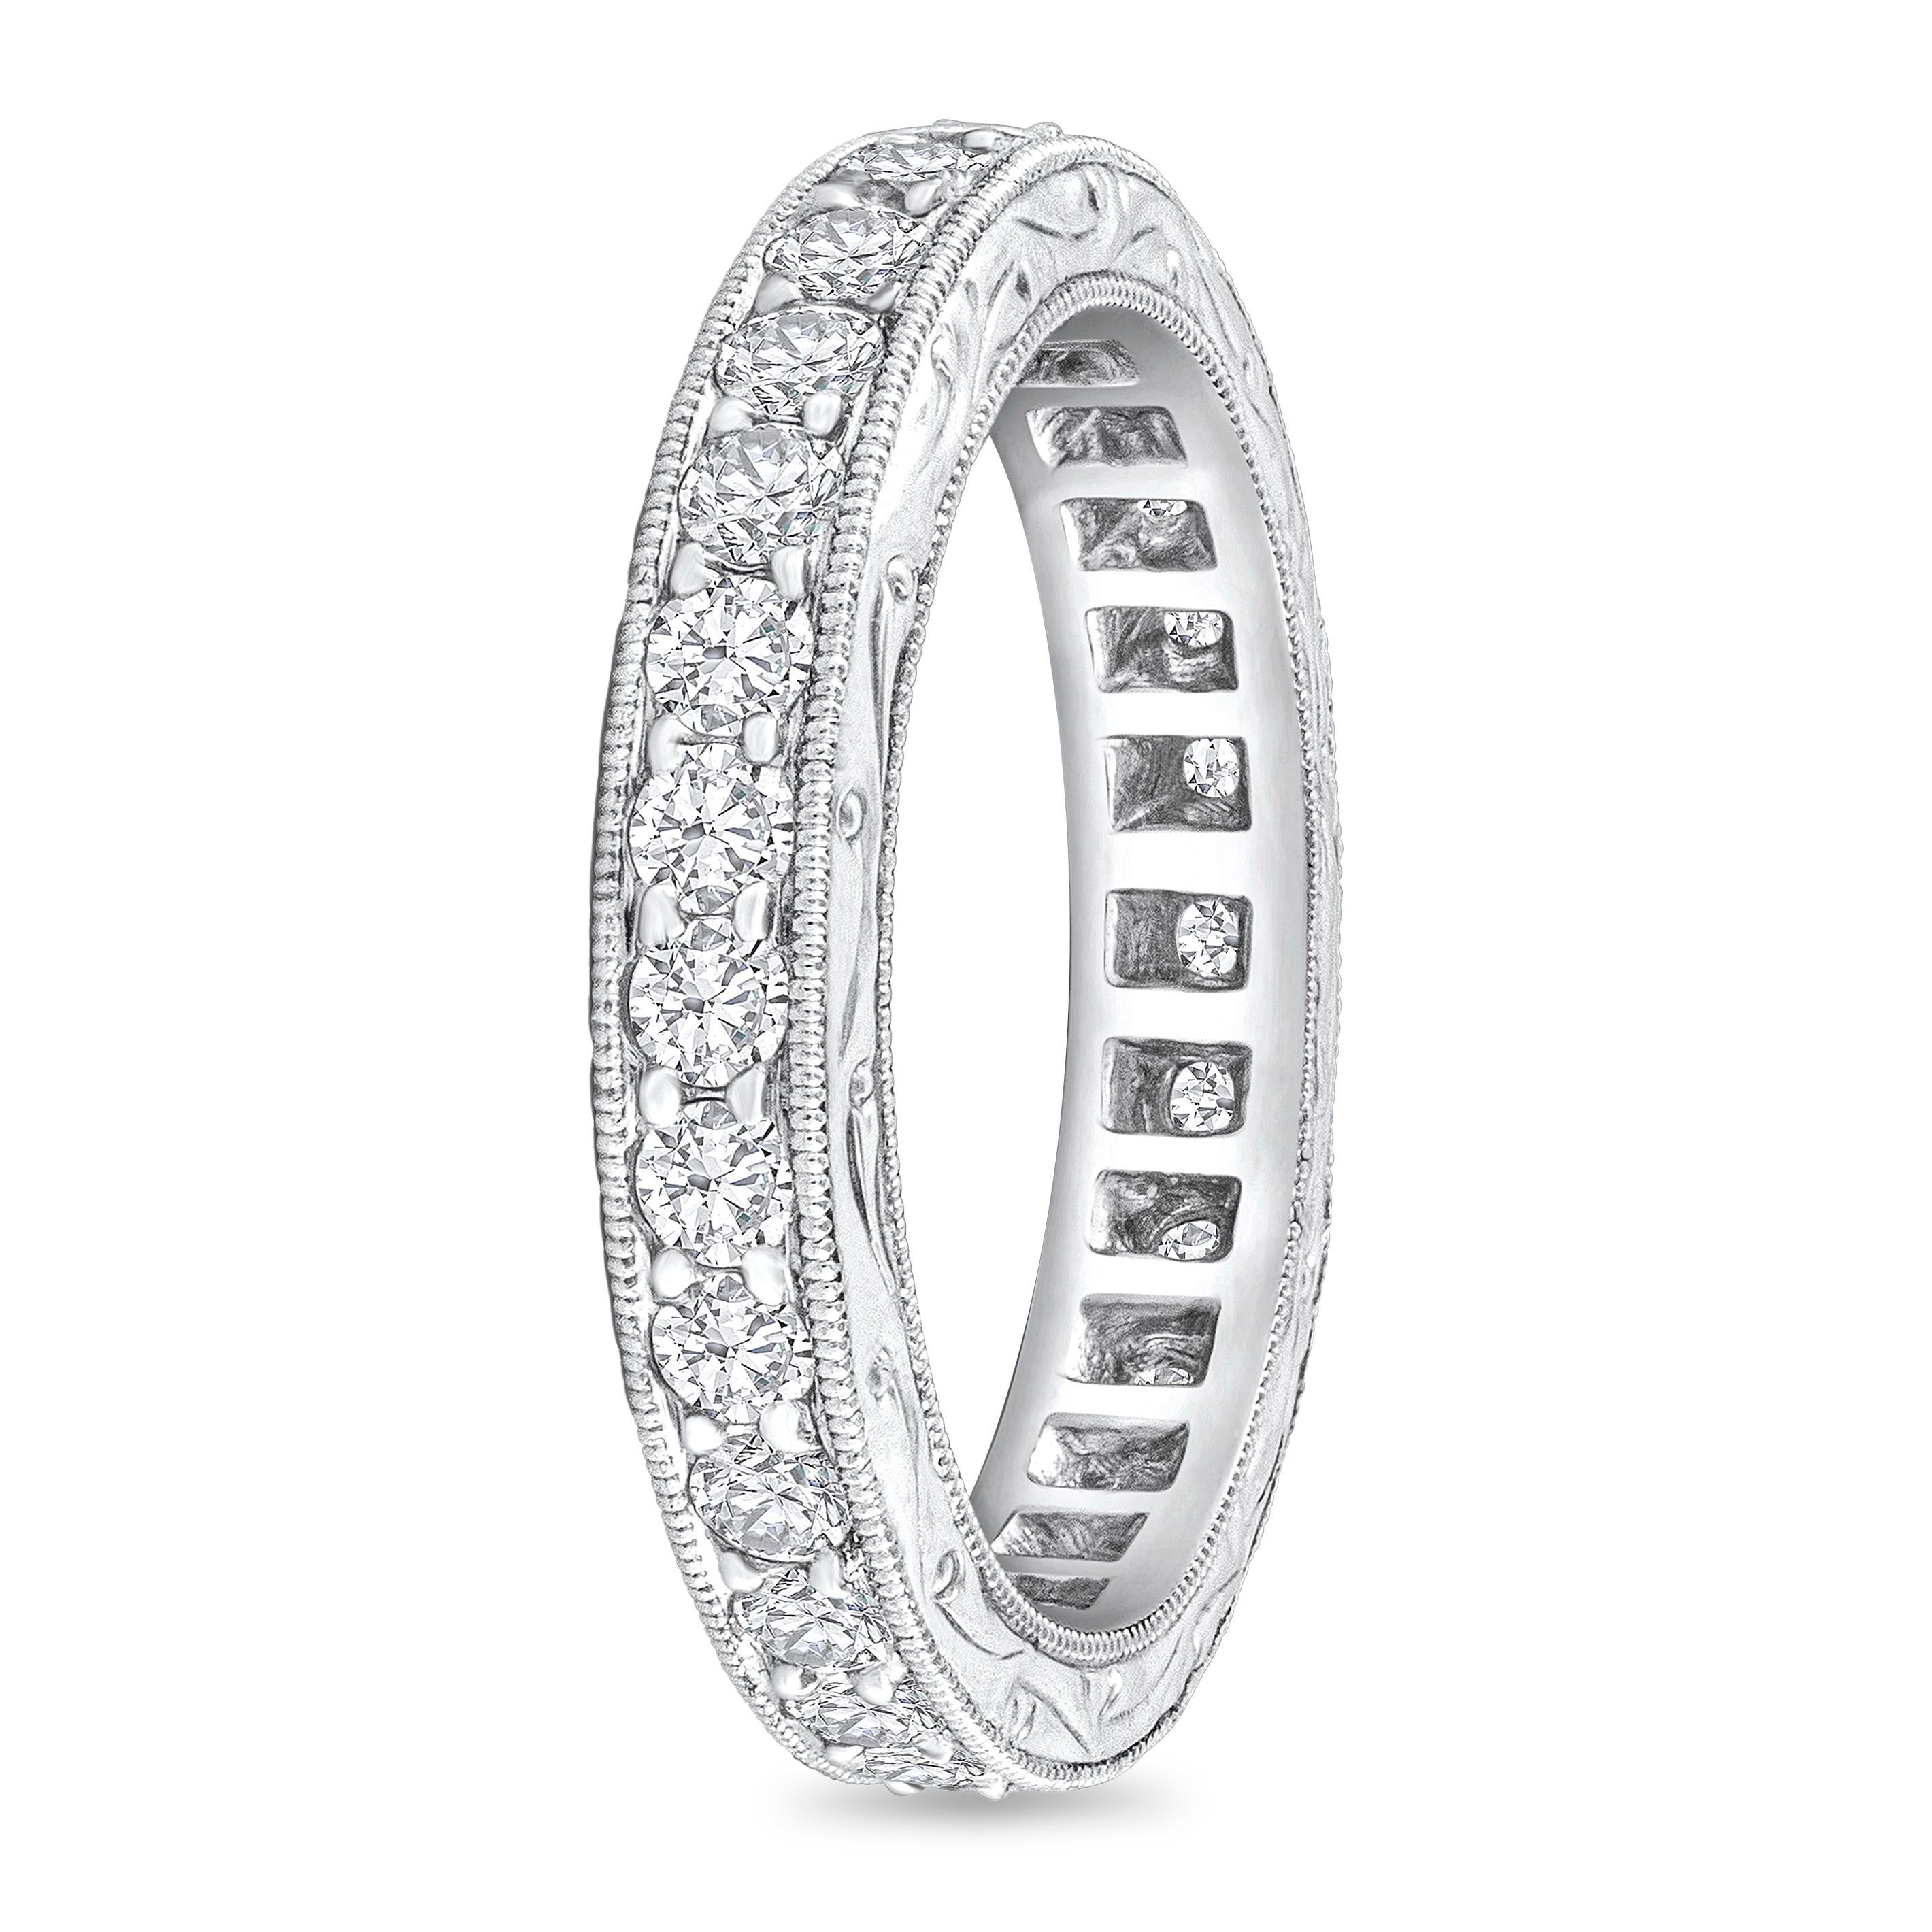 An expertly-crafted antique eternity wedding band ring showcasing brilliant round diamonds weighing 1.10 carats total. Channel-set and finished with intricate milgrain edges and a hand-engraved design. Made with Platinum, Size 6 US.